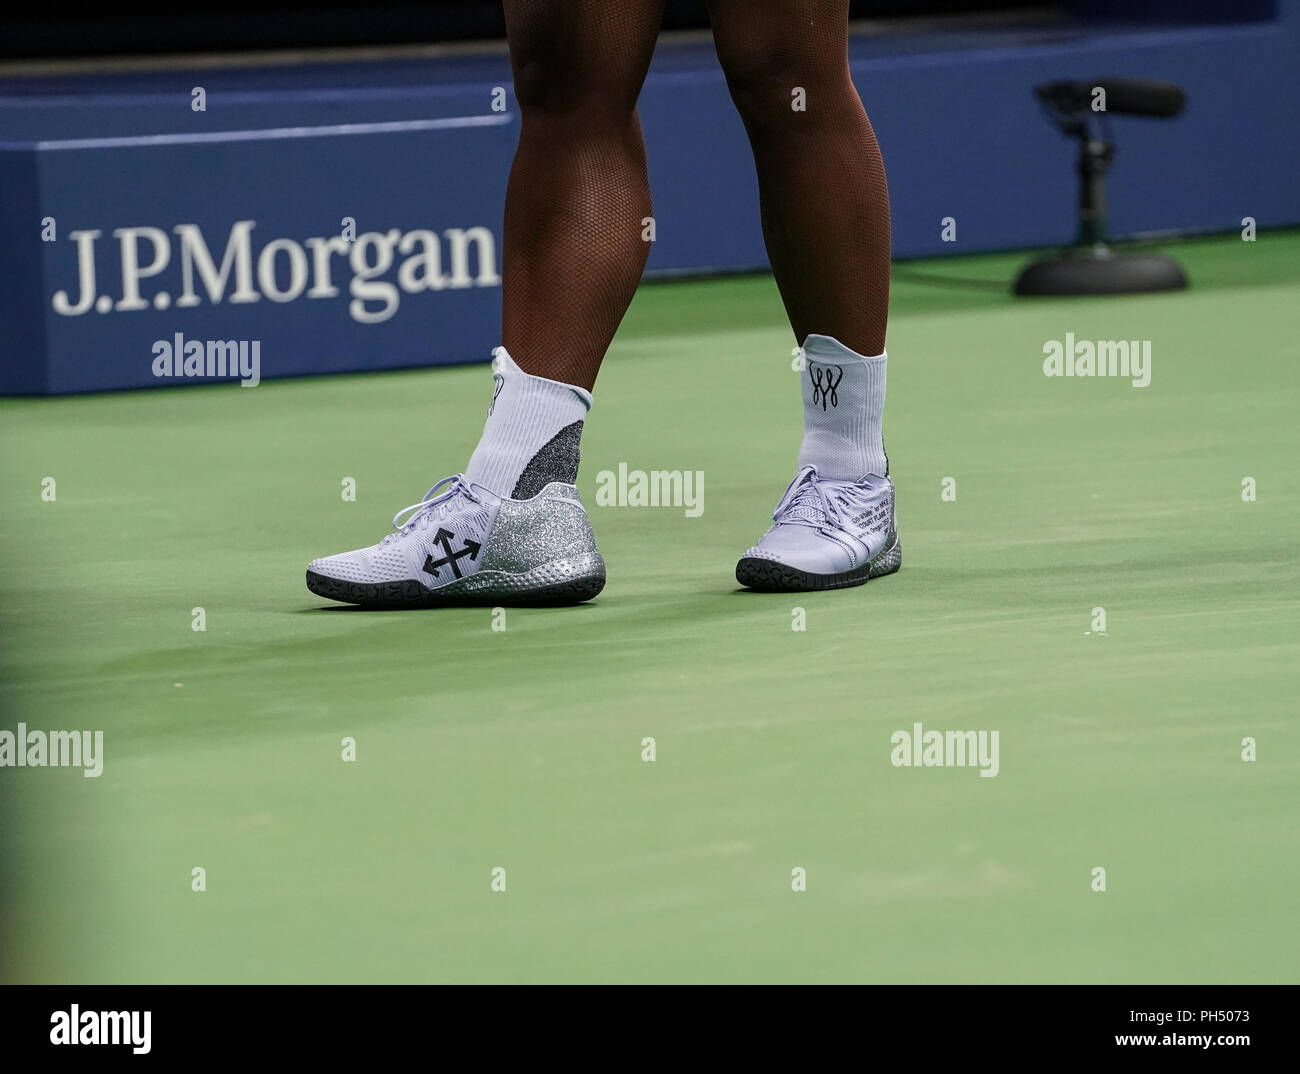 New York, United States. 29th Aug, 2018. Serena Williams of USA wearing  shoes Off White by Nike Court Flare 2 during US Open 2018 2nd round match  against Carina Witthoeft of Germany